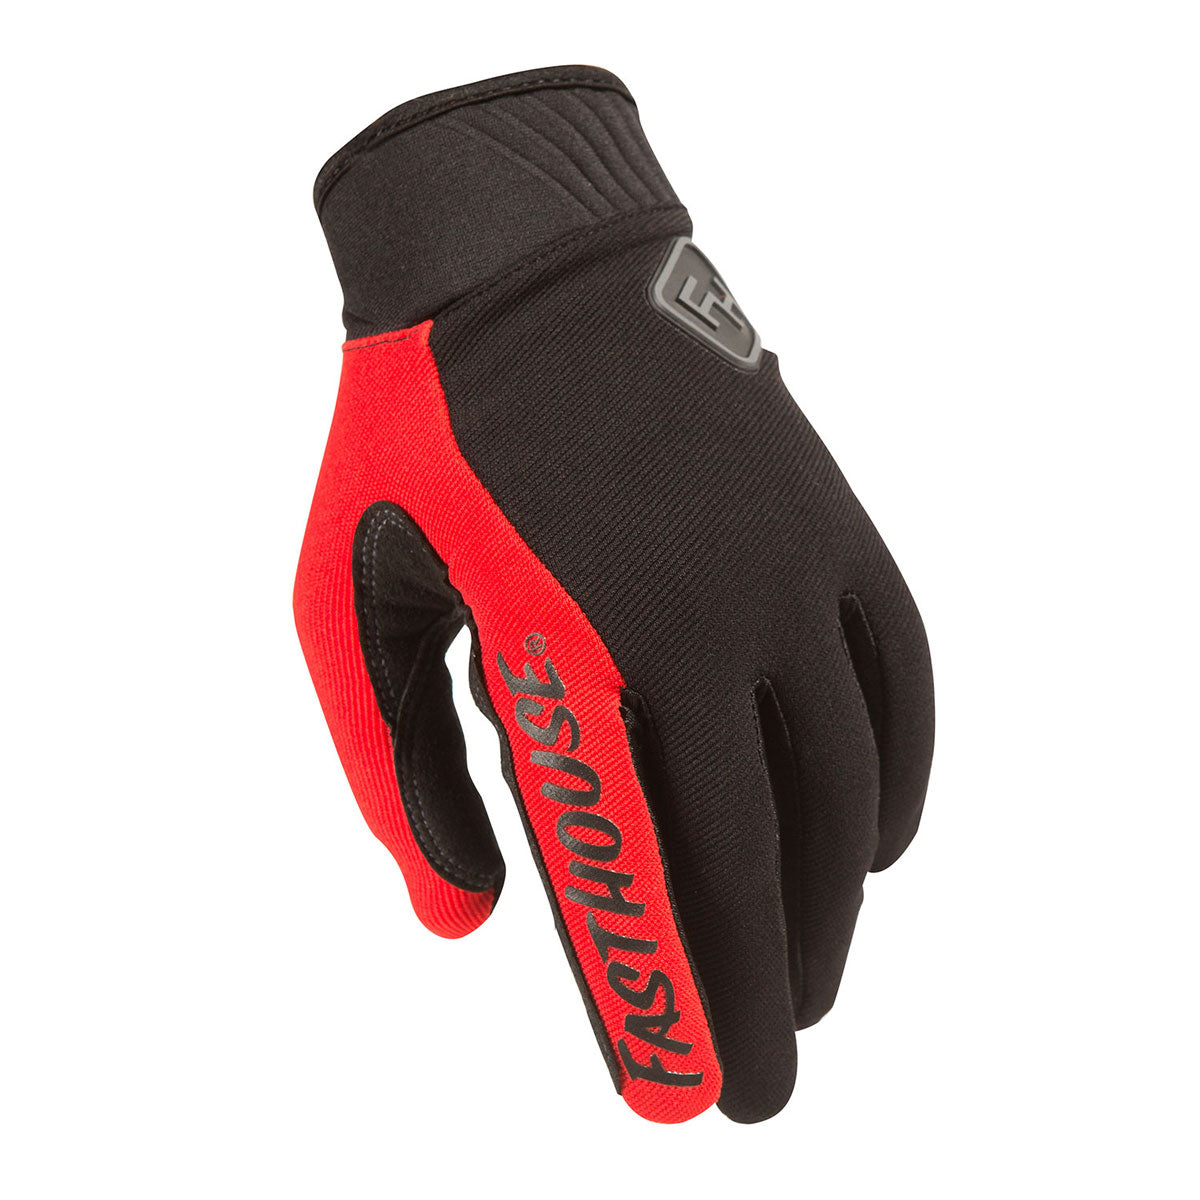 Fasthouse - Grindhouse 2.0 Glove - Red